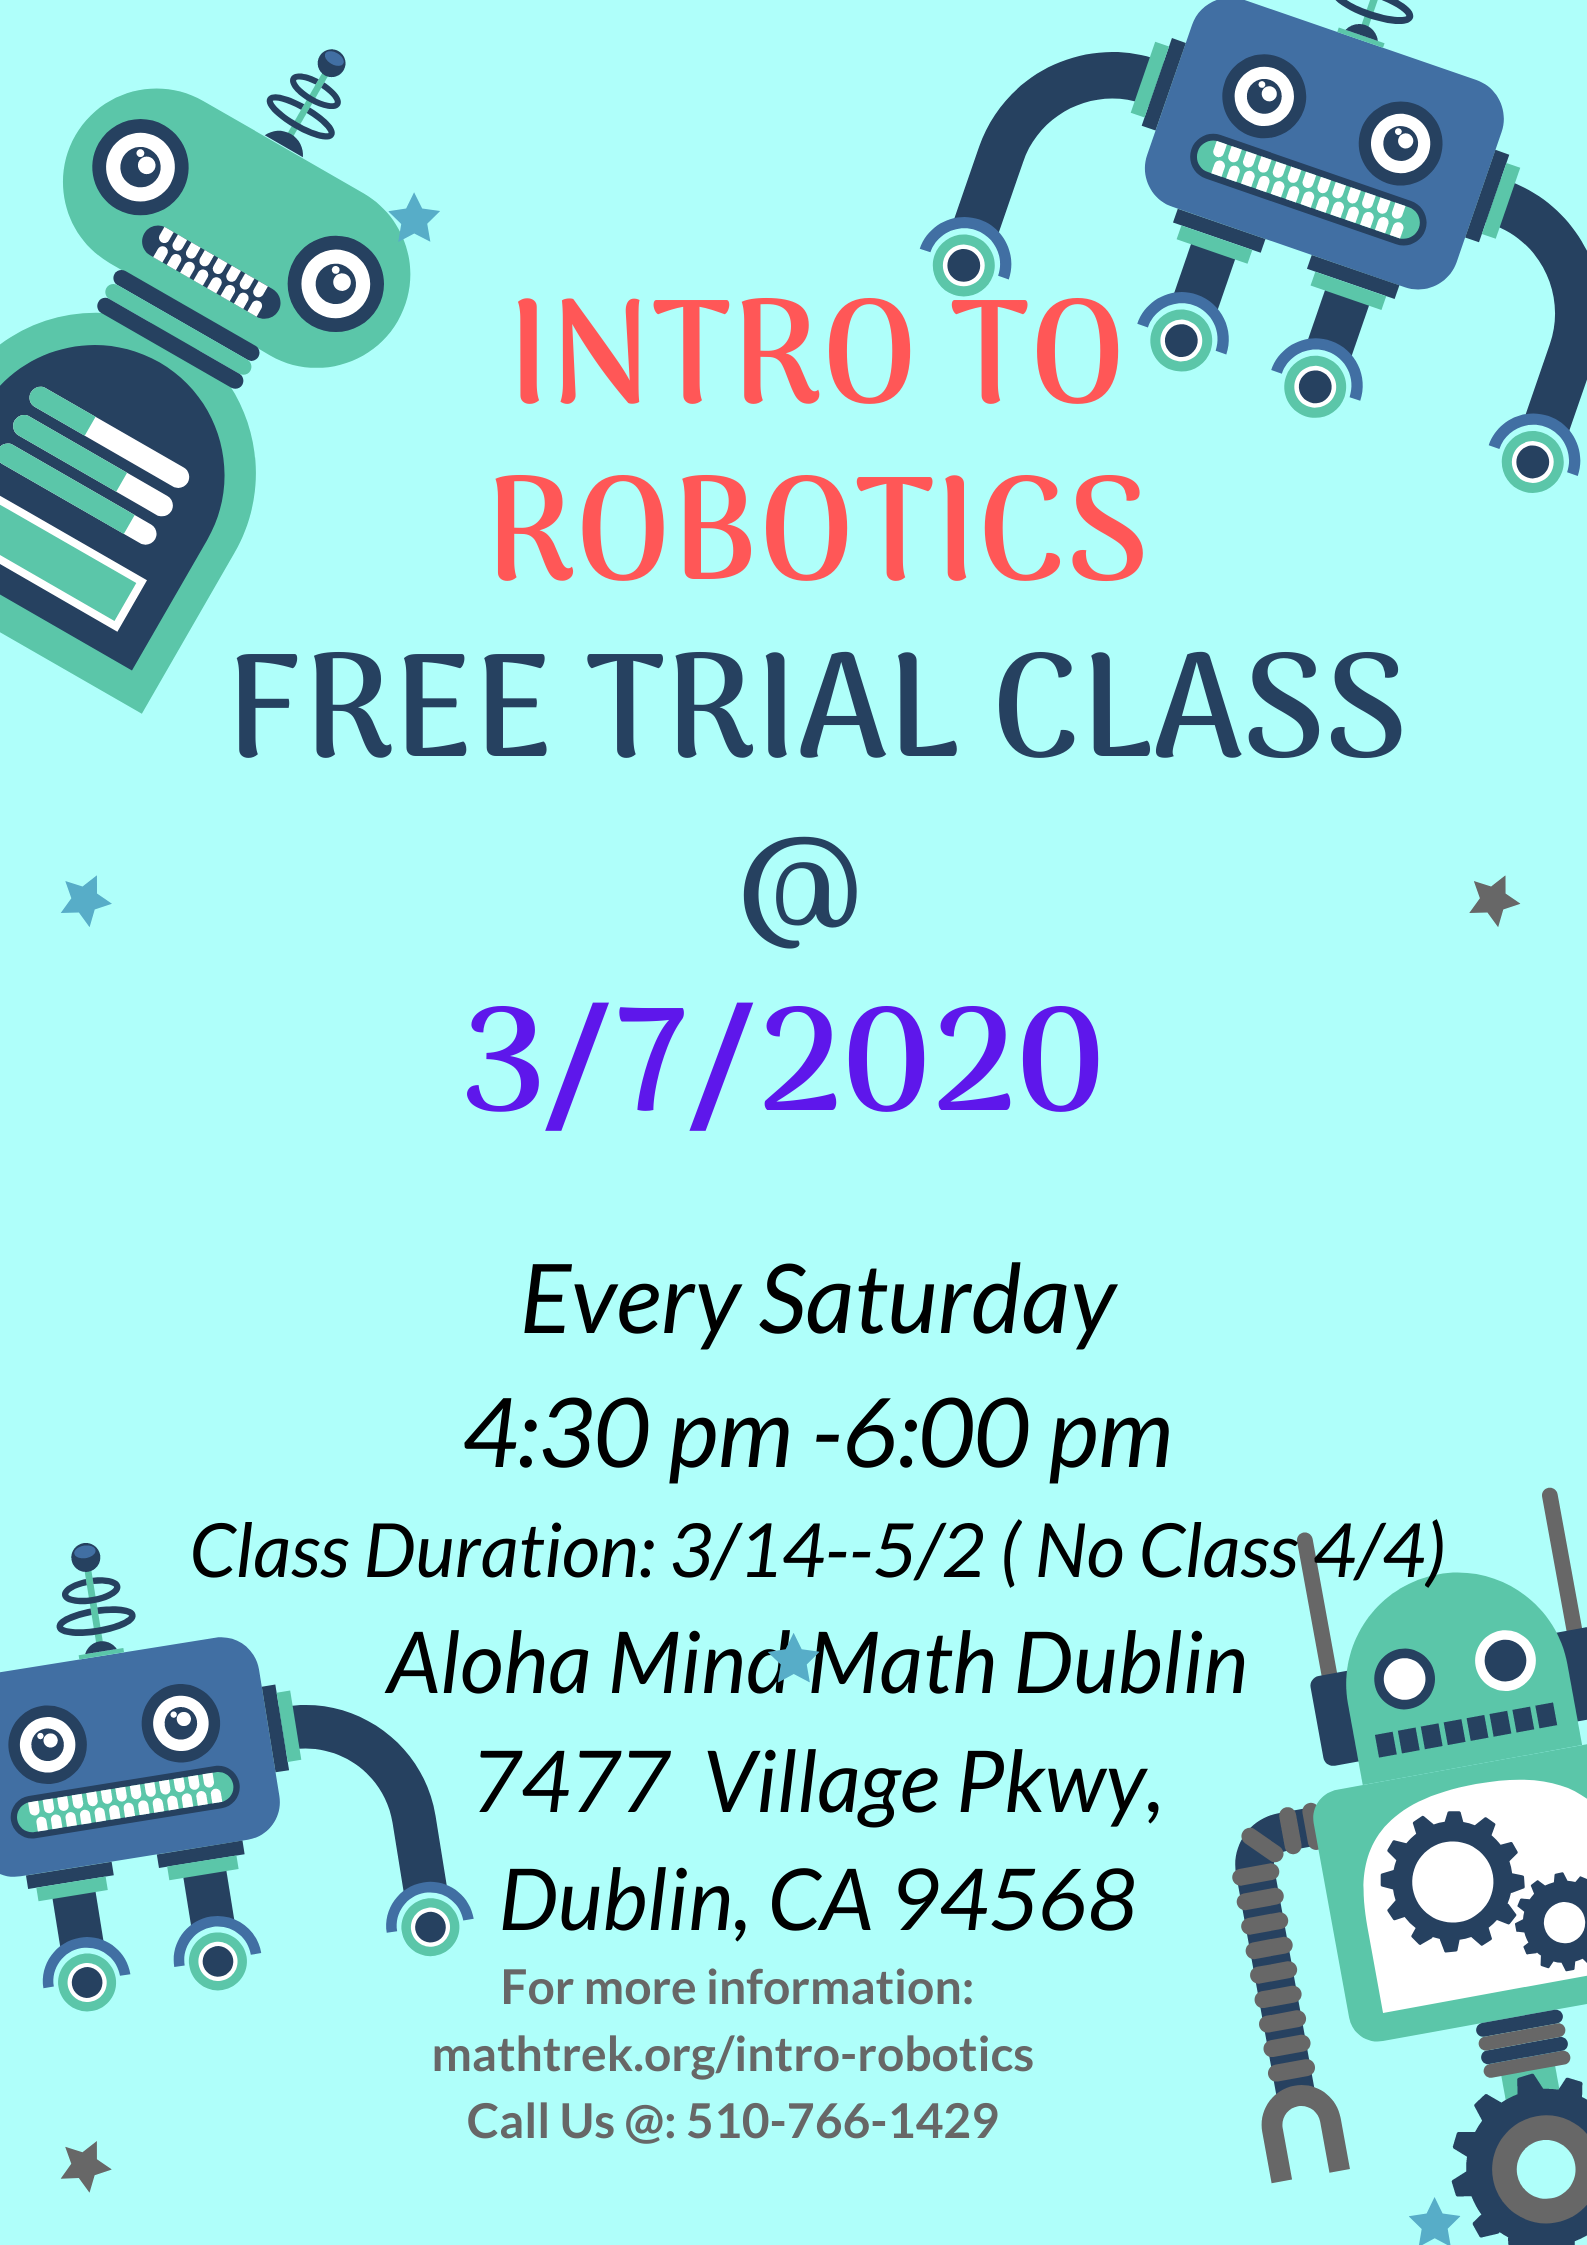 Come for a Free Introduction to Robotics Class